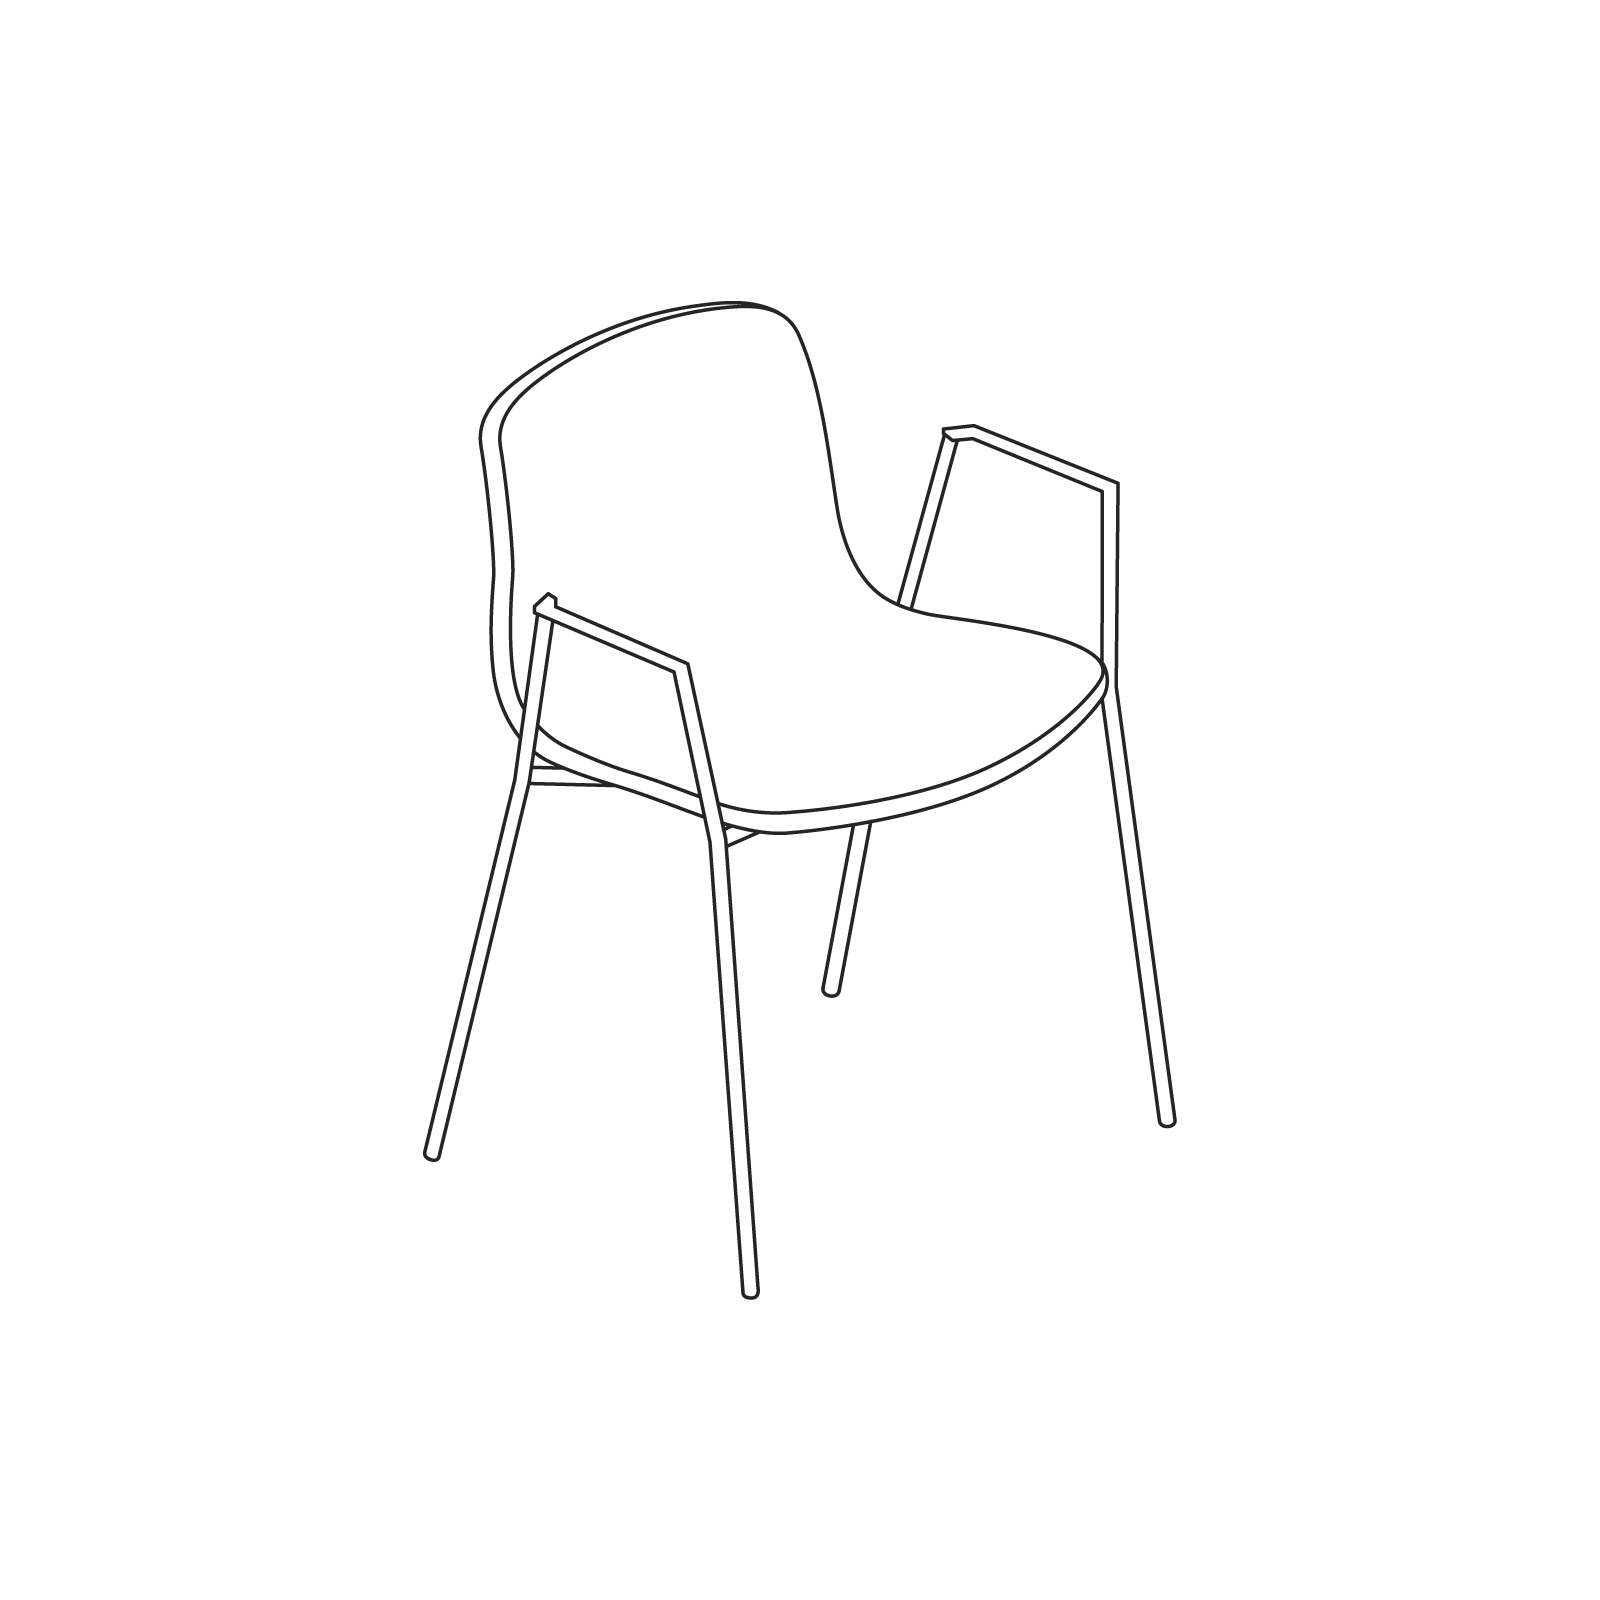 A line drawing - About A Chair–With Arms–Metal Stacking Base (AAC18, AAC19)